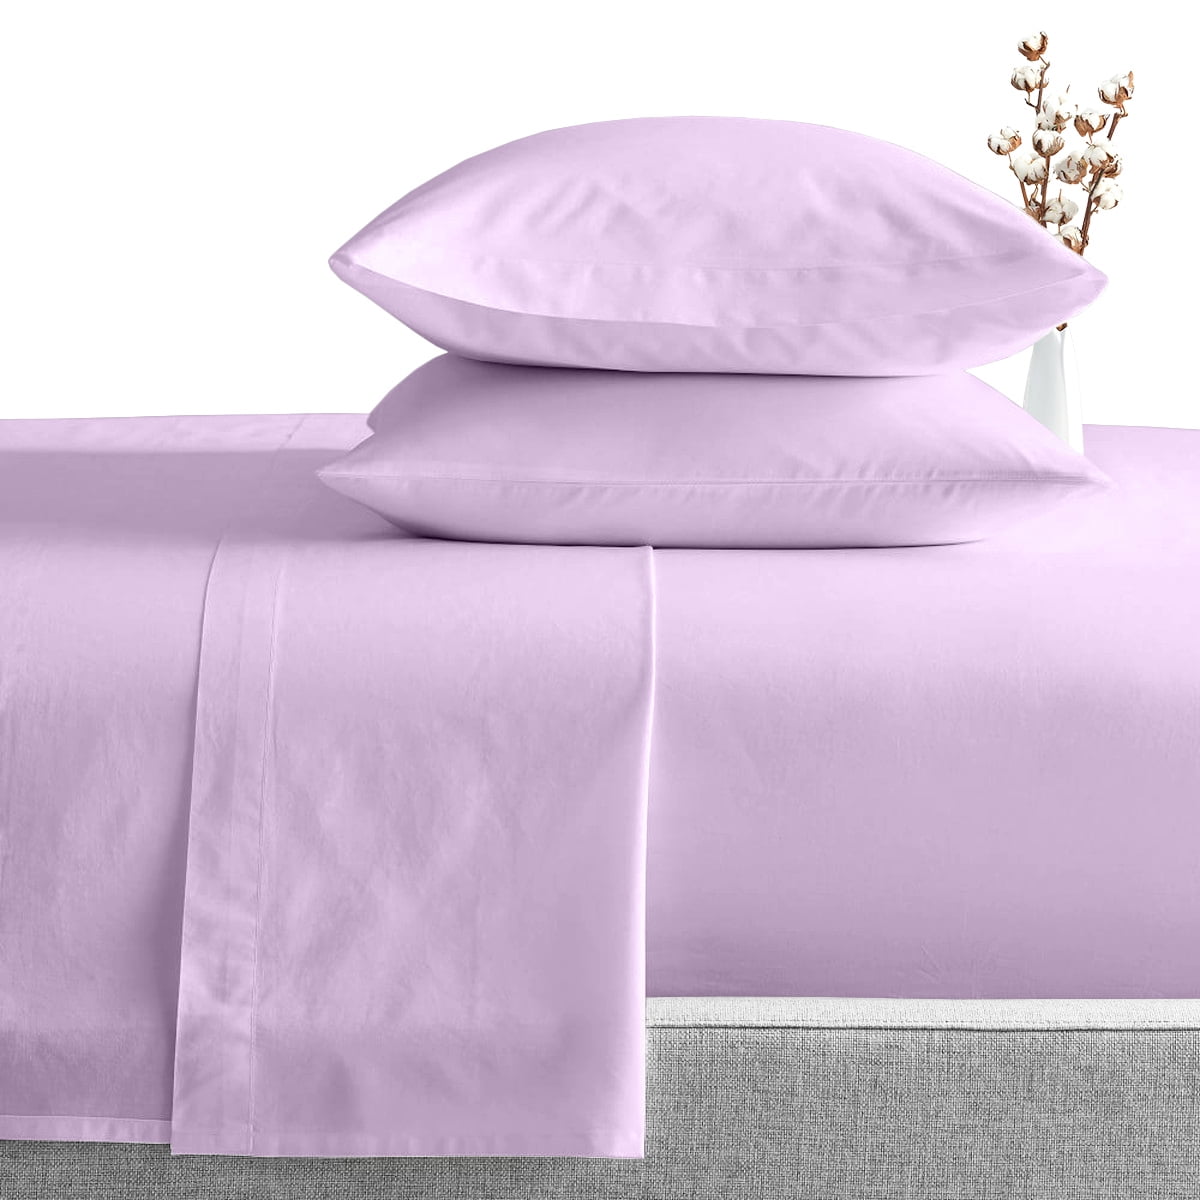 Extra Deep Pocket Fitted Sheet+2 Pillow Case 1000TC Egyptian Cotton Purple Solid 